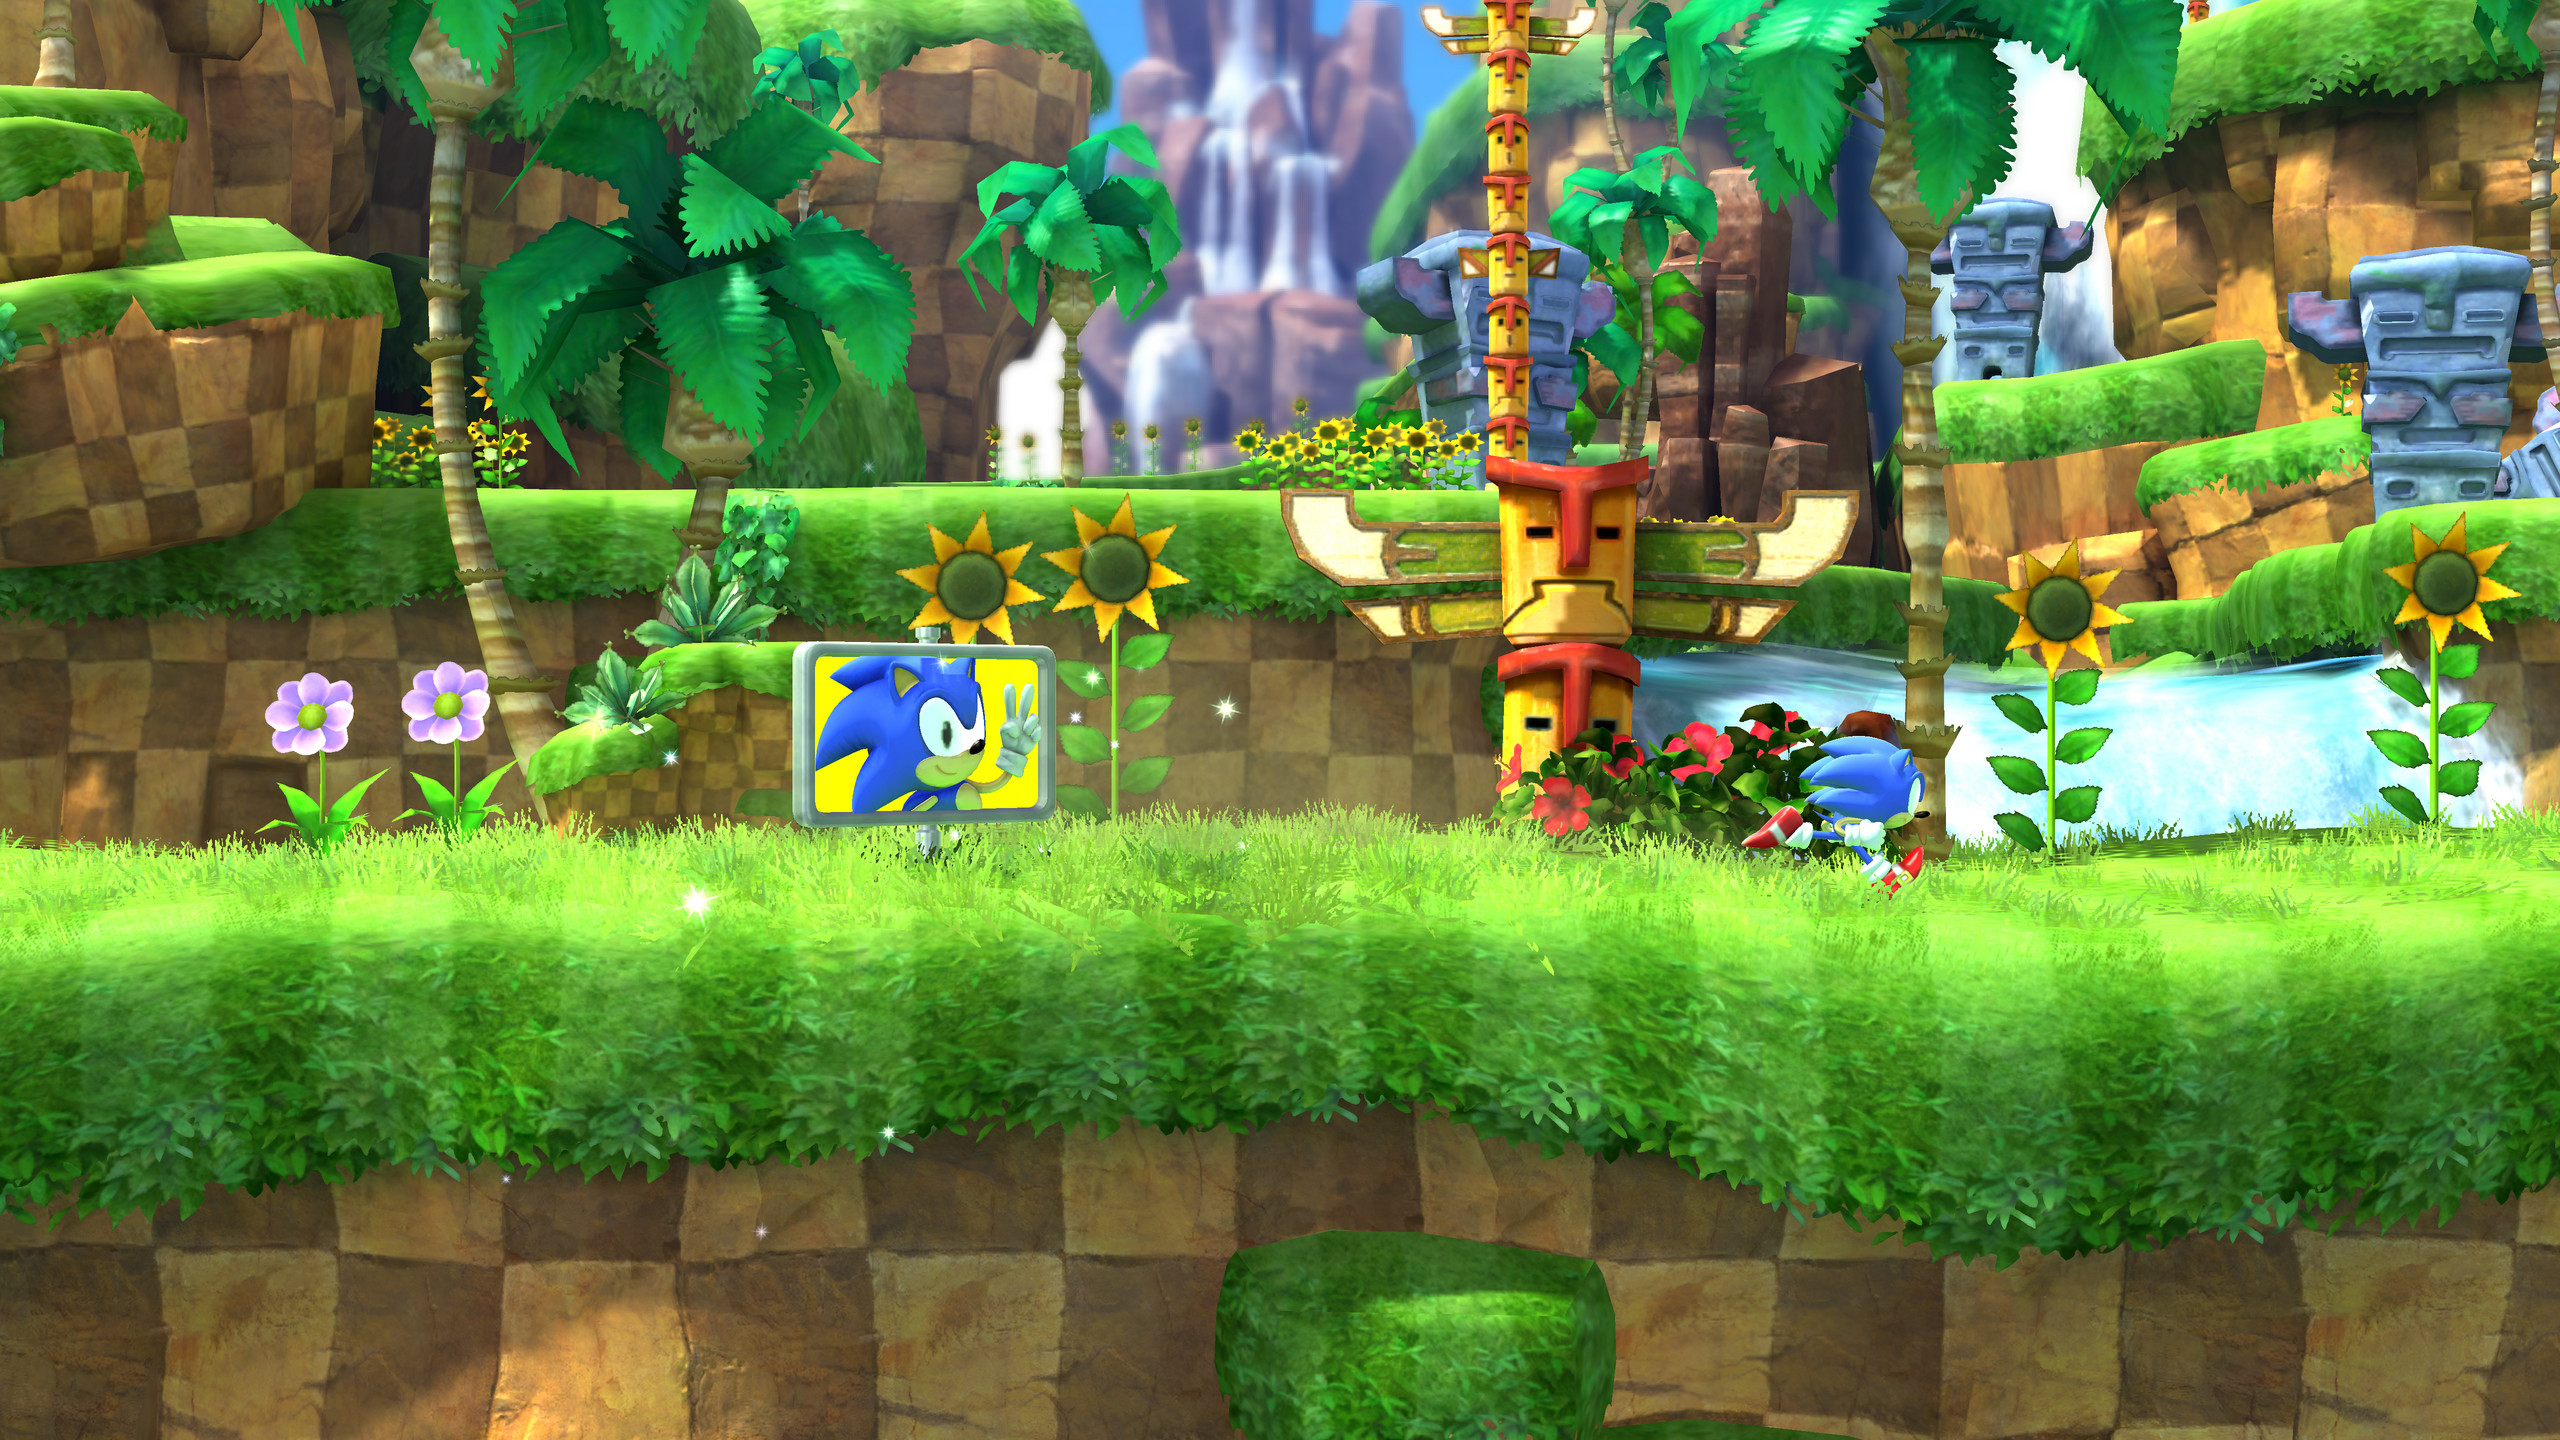 2560x1440 Sonic Generations images Sonic Generations Screenshots HD wallpaper and  background photos